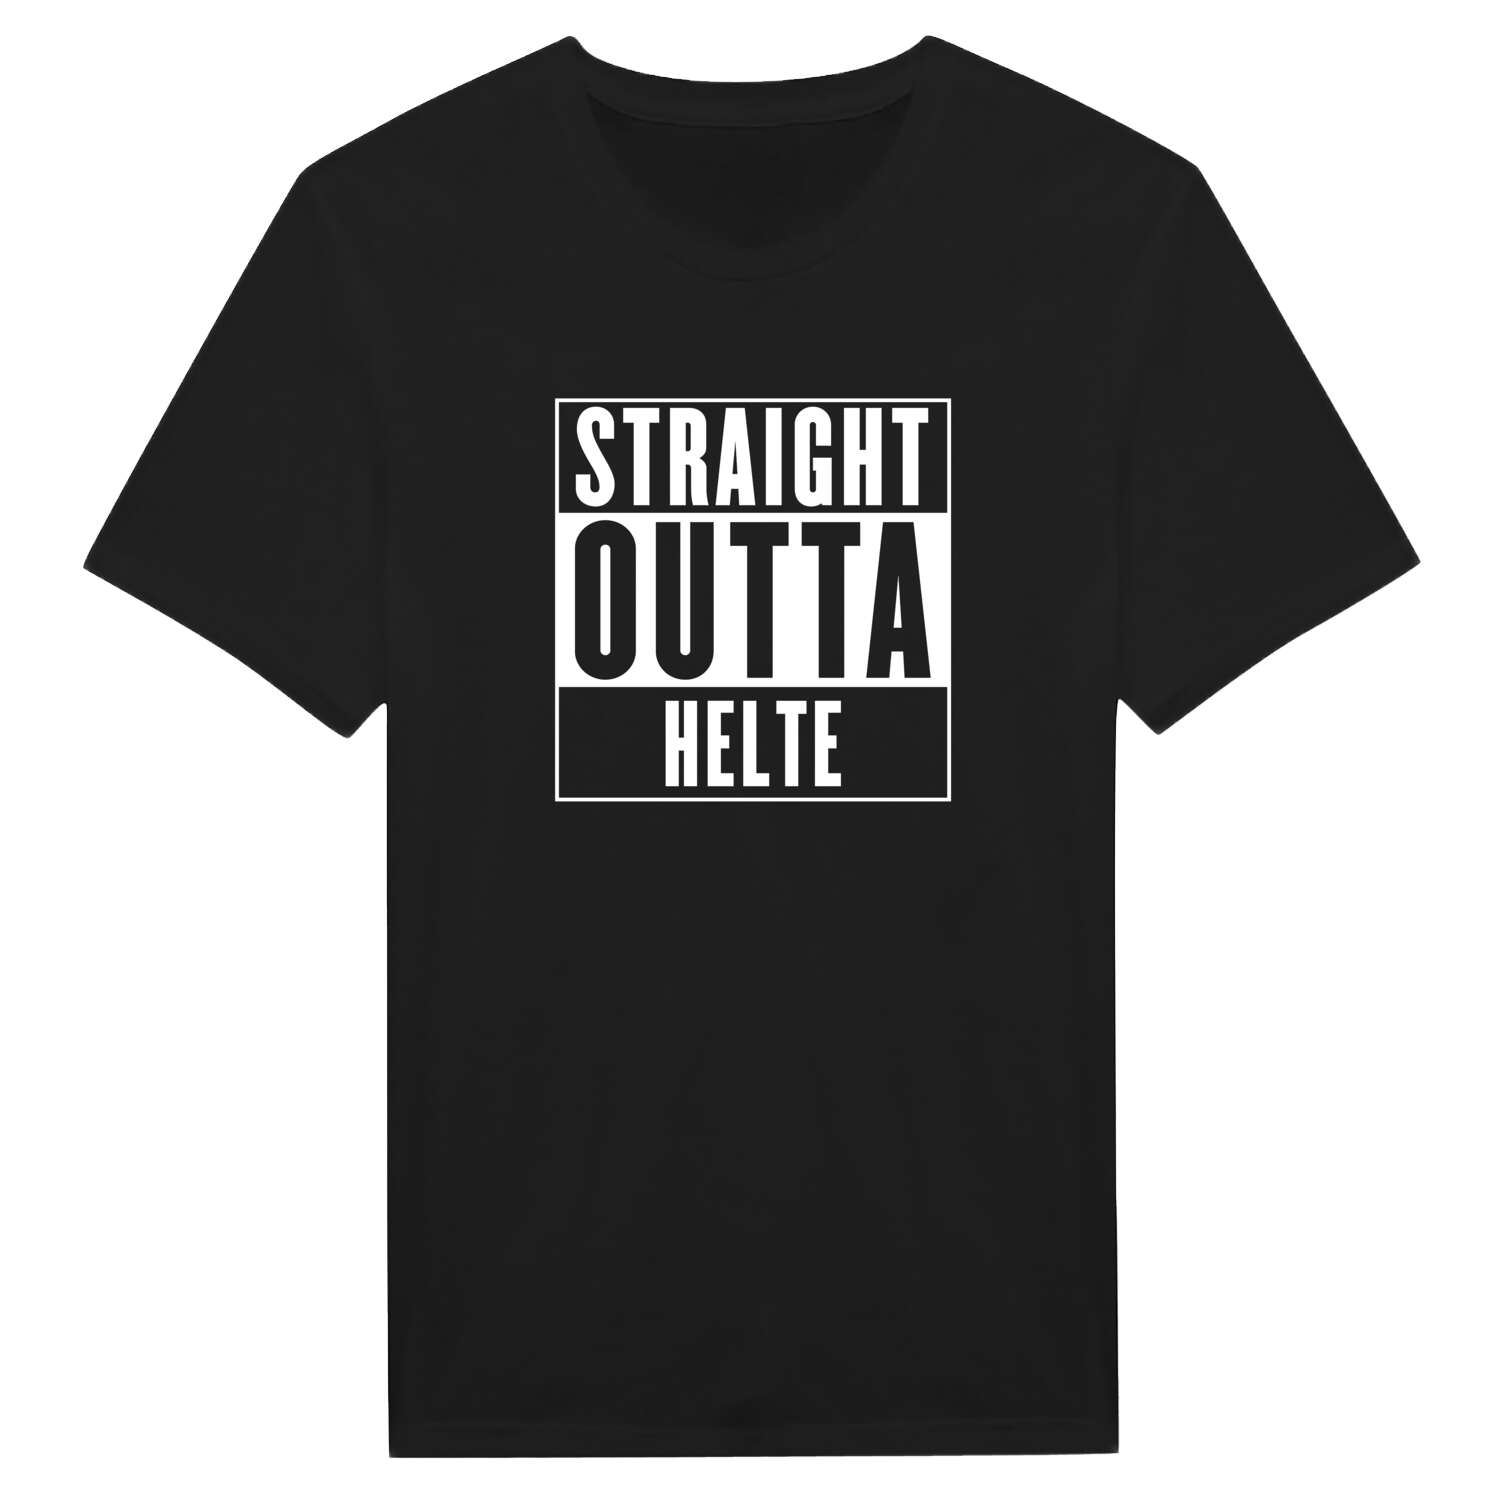 Helte T-Shirt »Straight Outta«